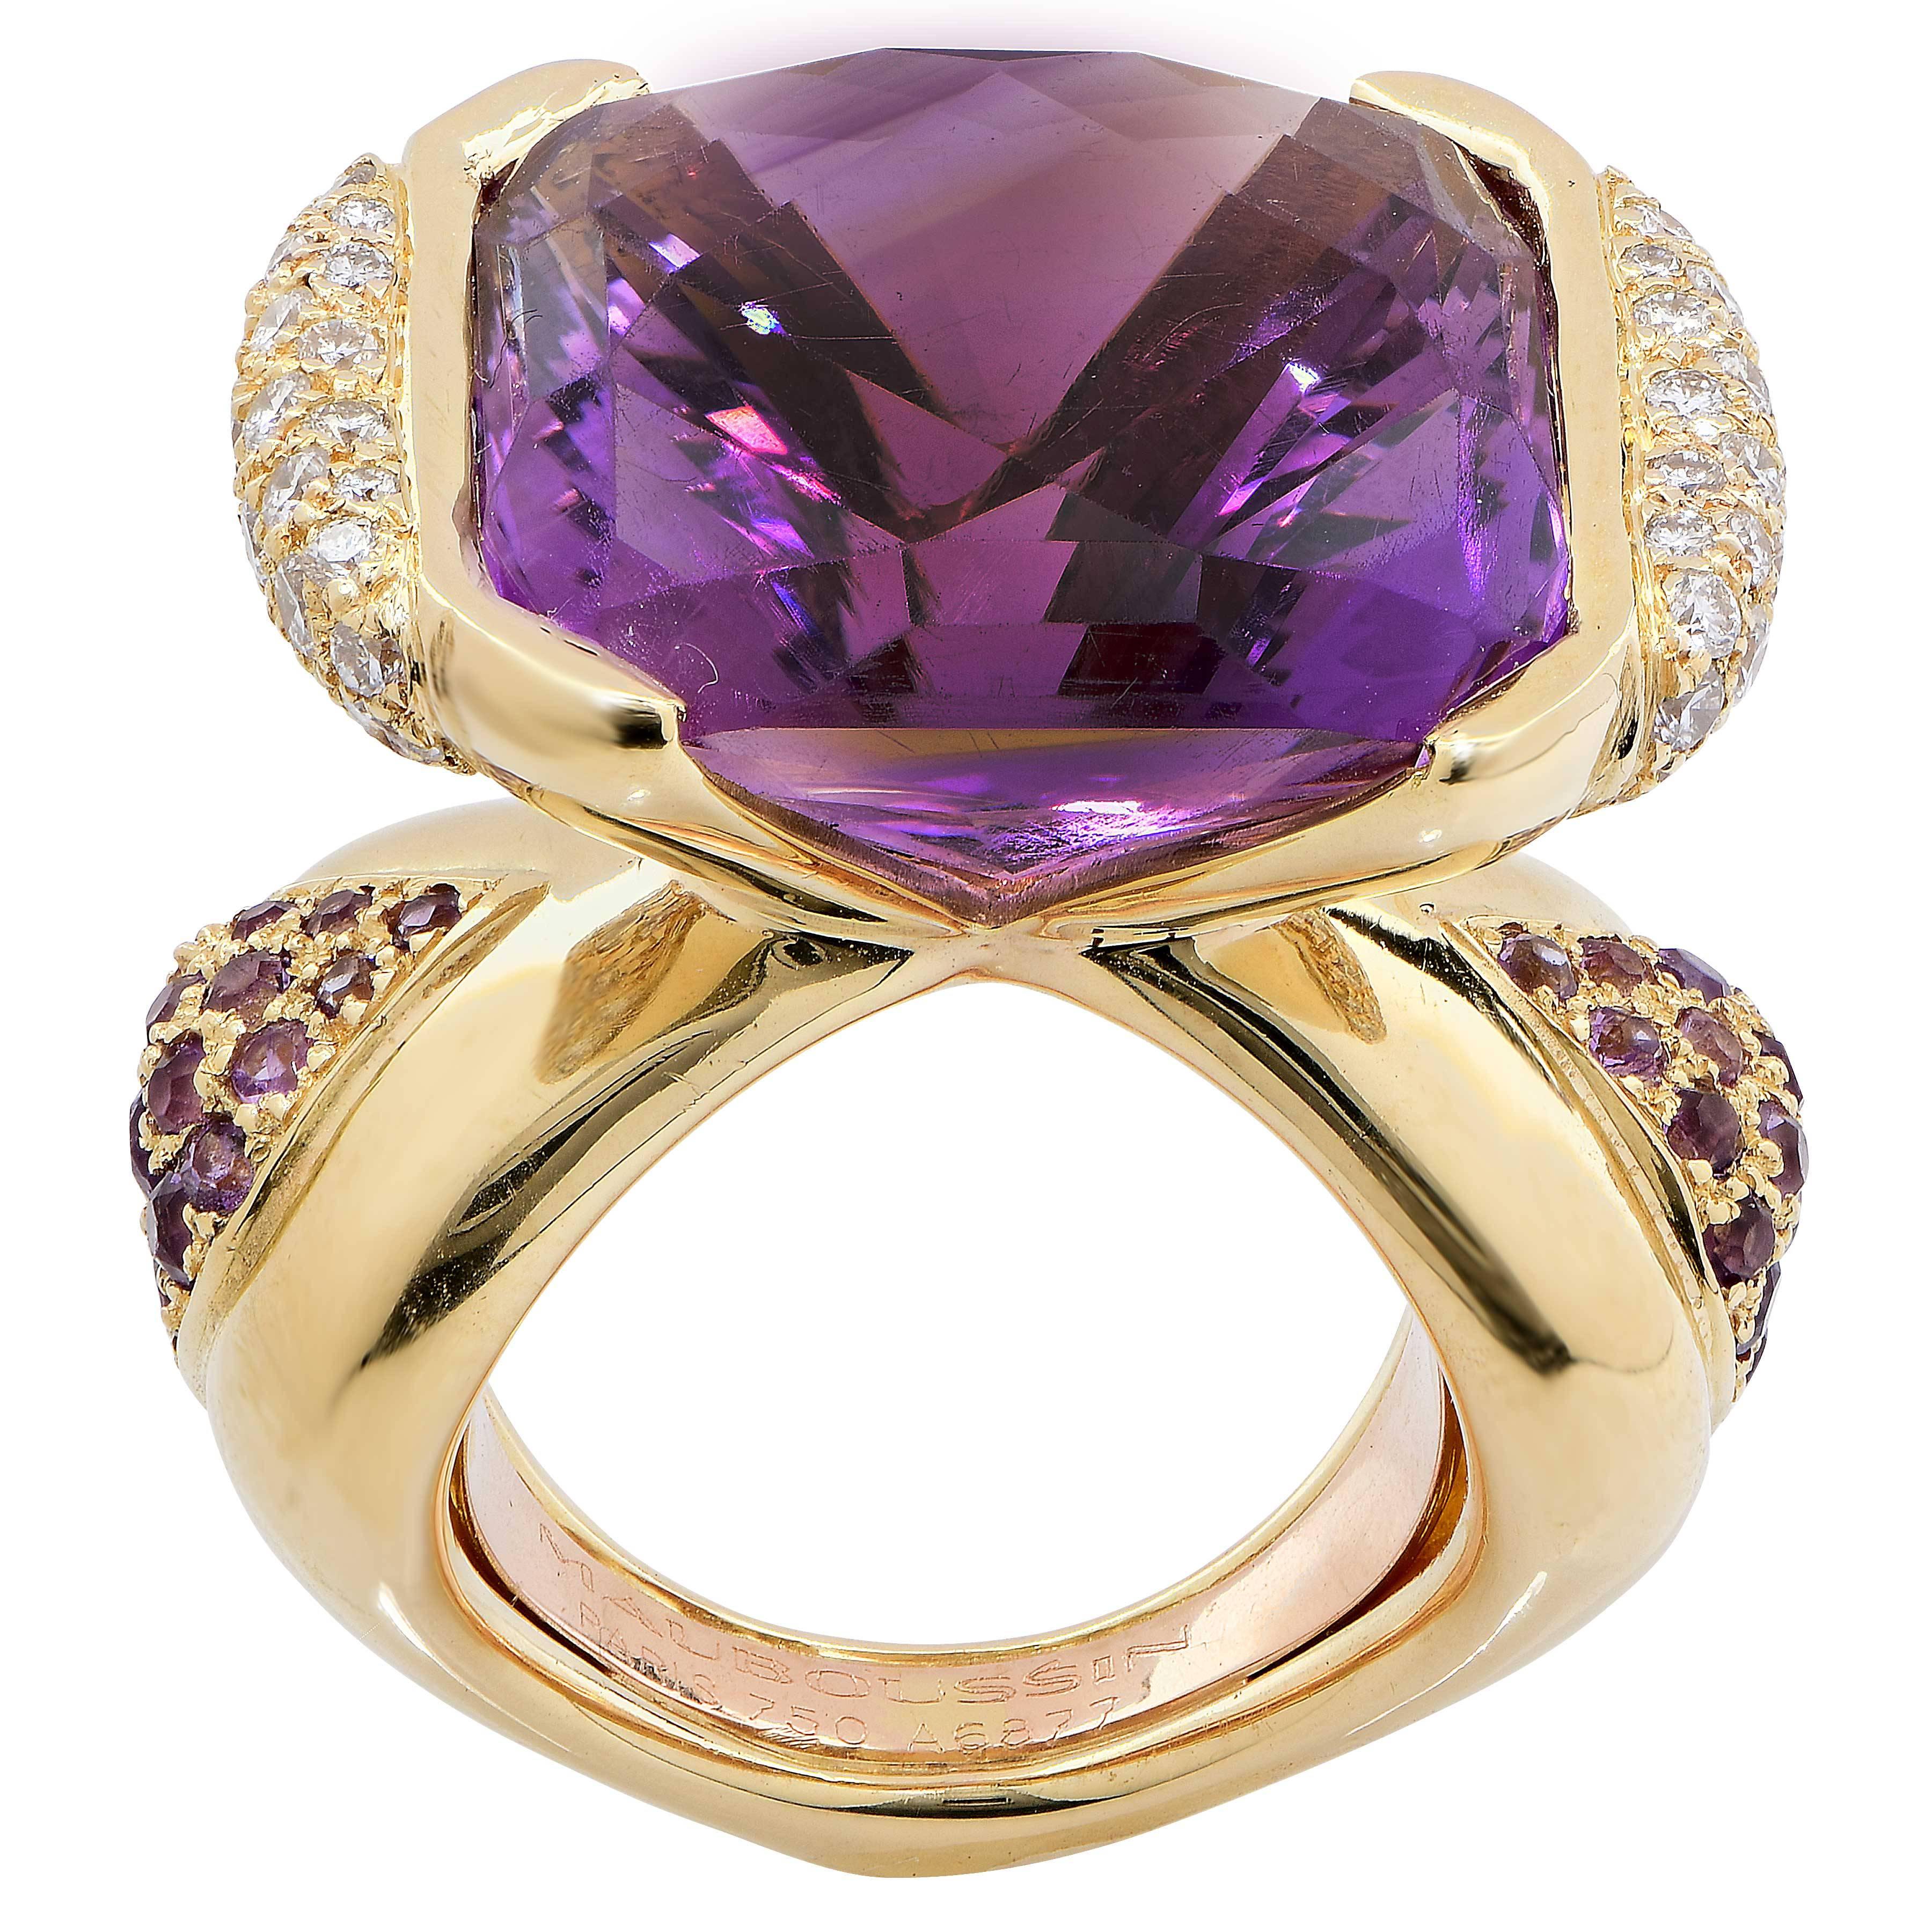 This wonderful design by Mauboussin, Paris features a modified cushion cut Amethyst which weighs approximately 20 carats and is flanked by triangular shaped panels pave set with 68 round brilliant cut diamonds with an estimated total weight of 1.4